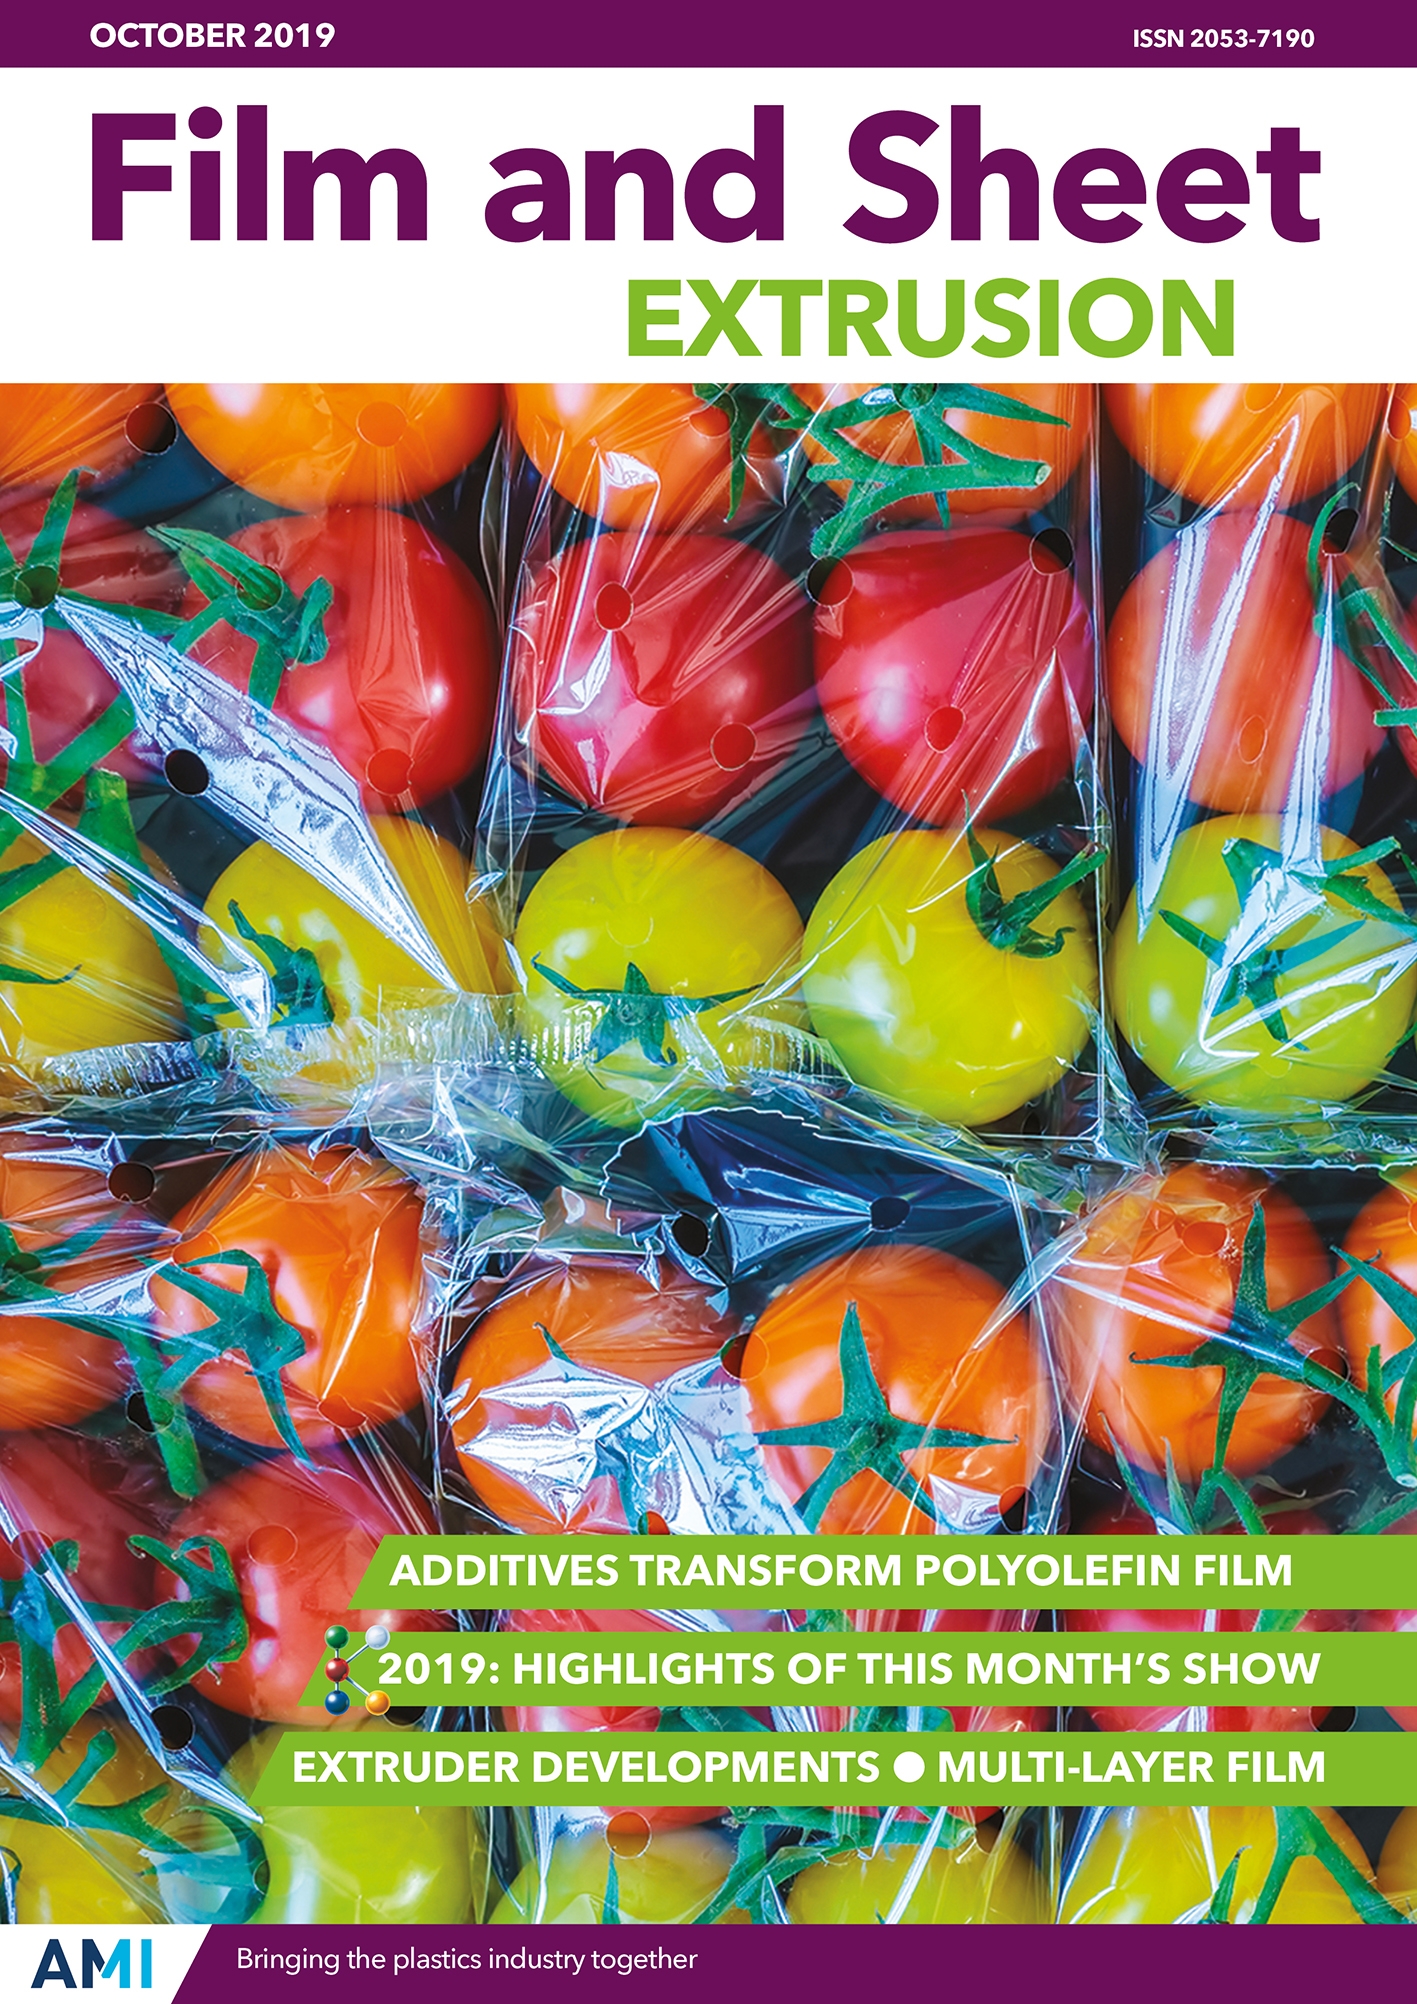 Film and Sheet Extrusion October 2019